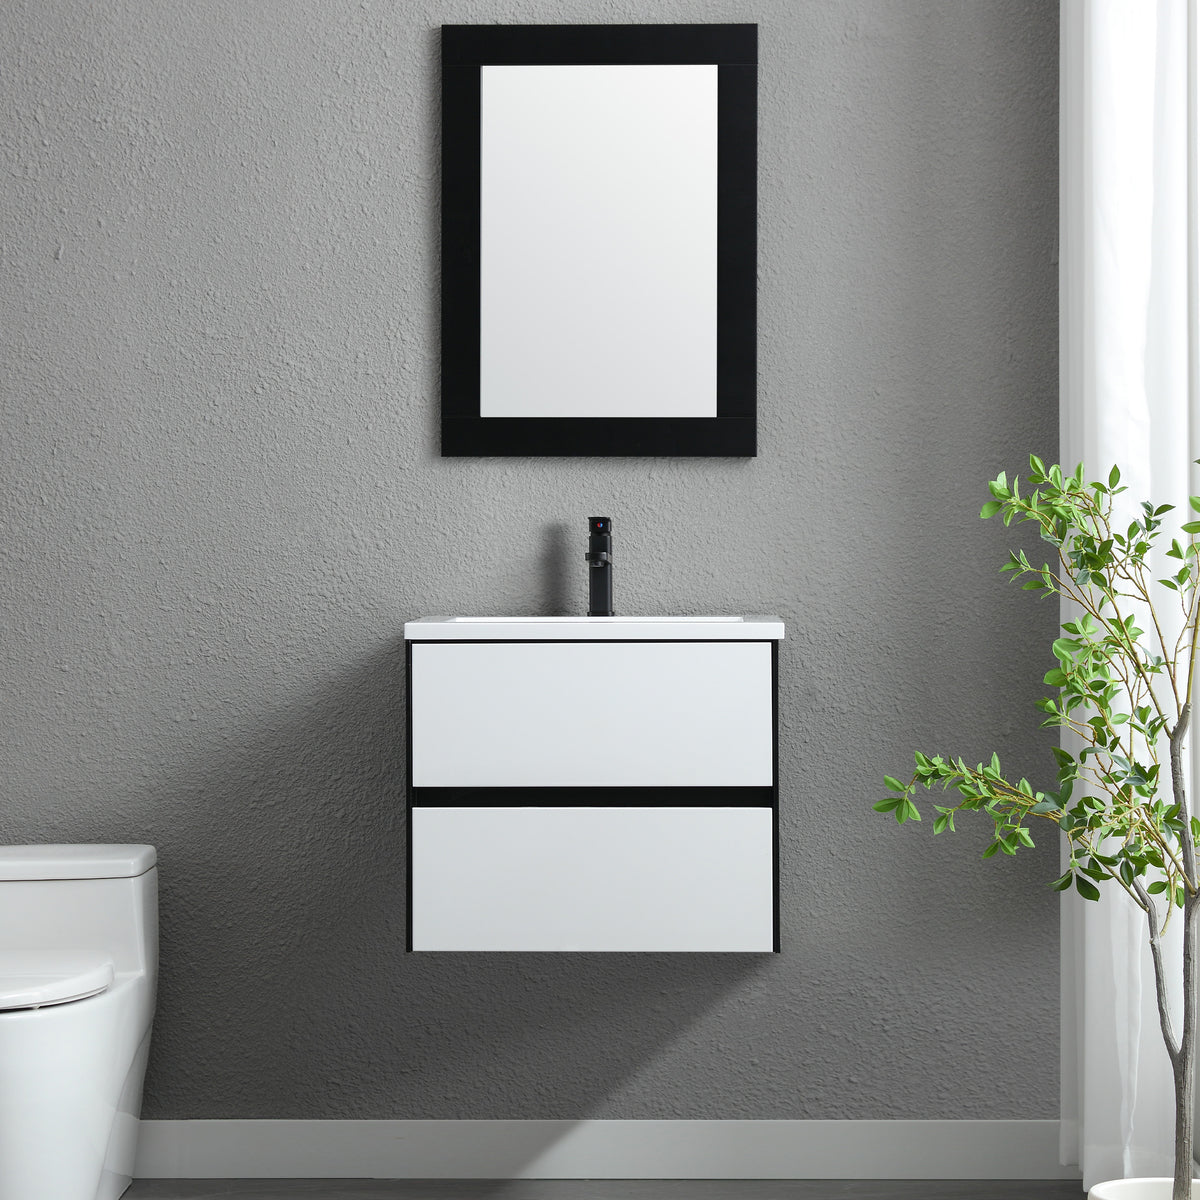 Eclife 24" Wall Mounted Floating Bathroom Cabinet with Colors Mixed Style, 2 Big Drawers and Matte Black Faucet